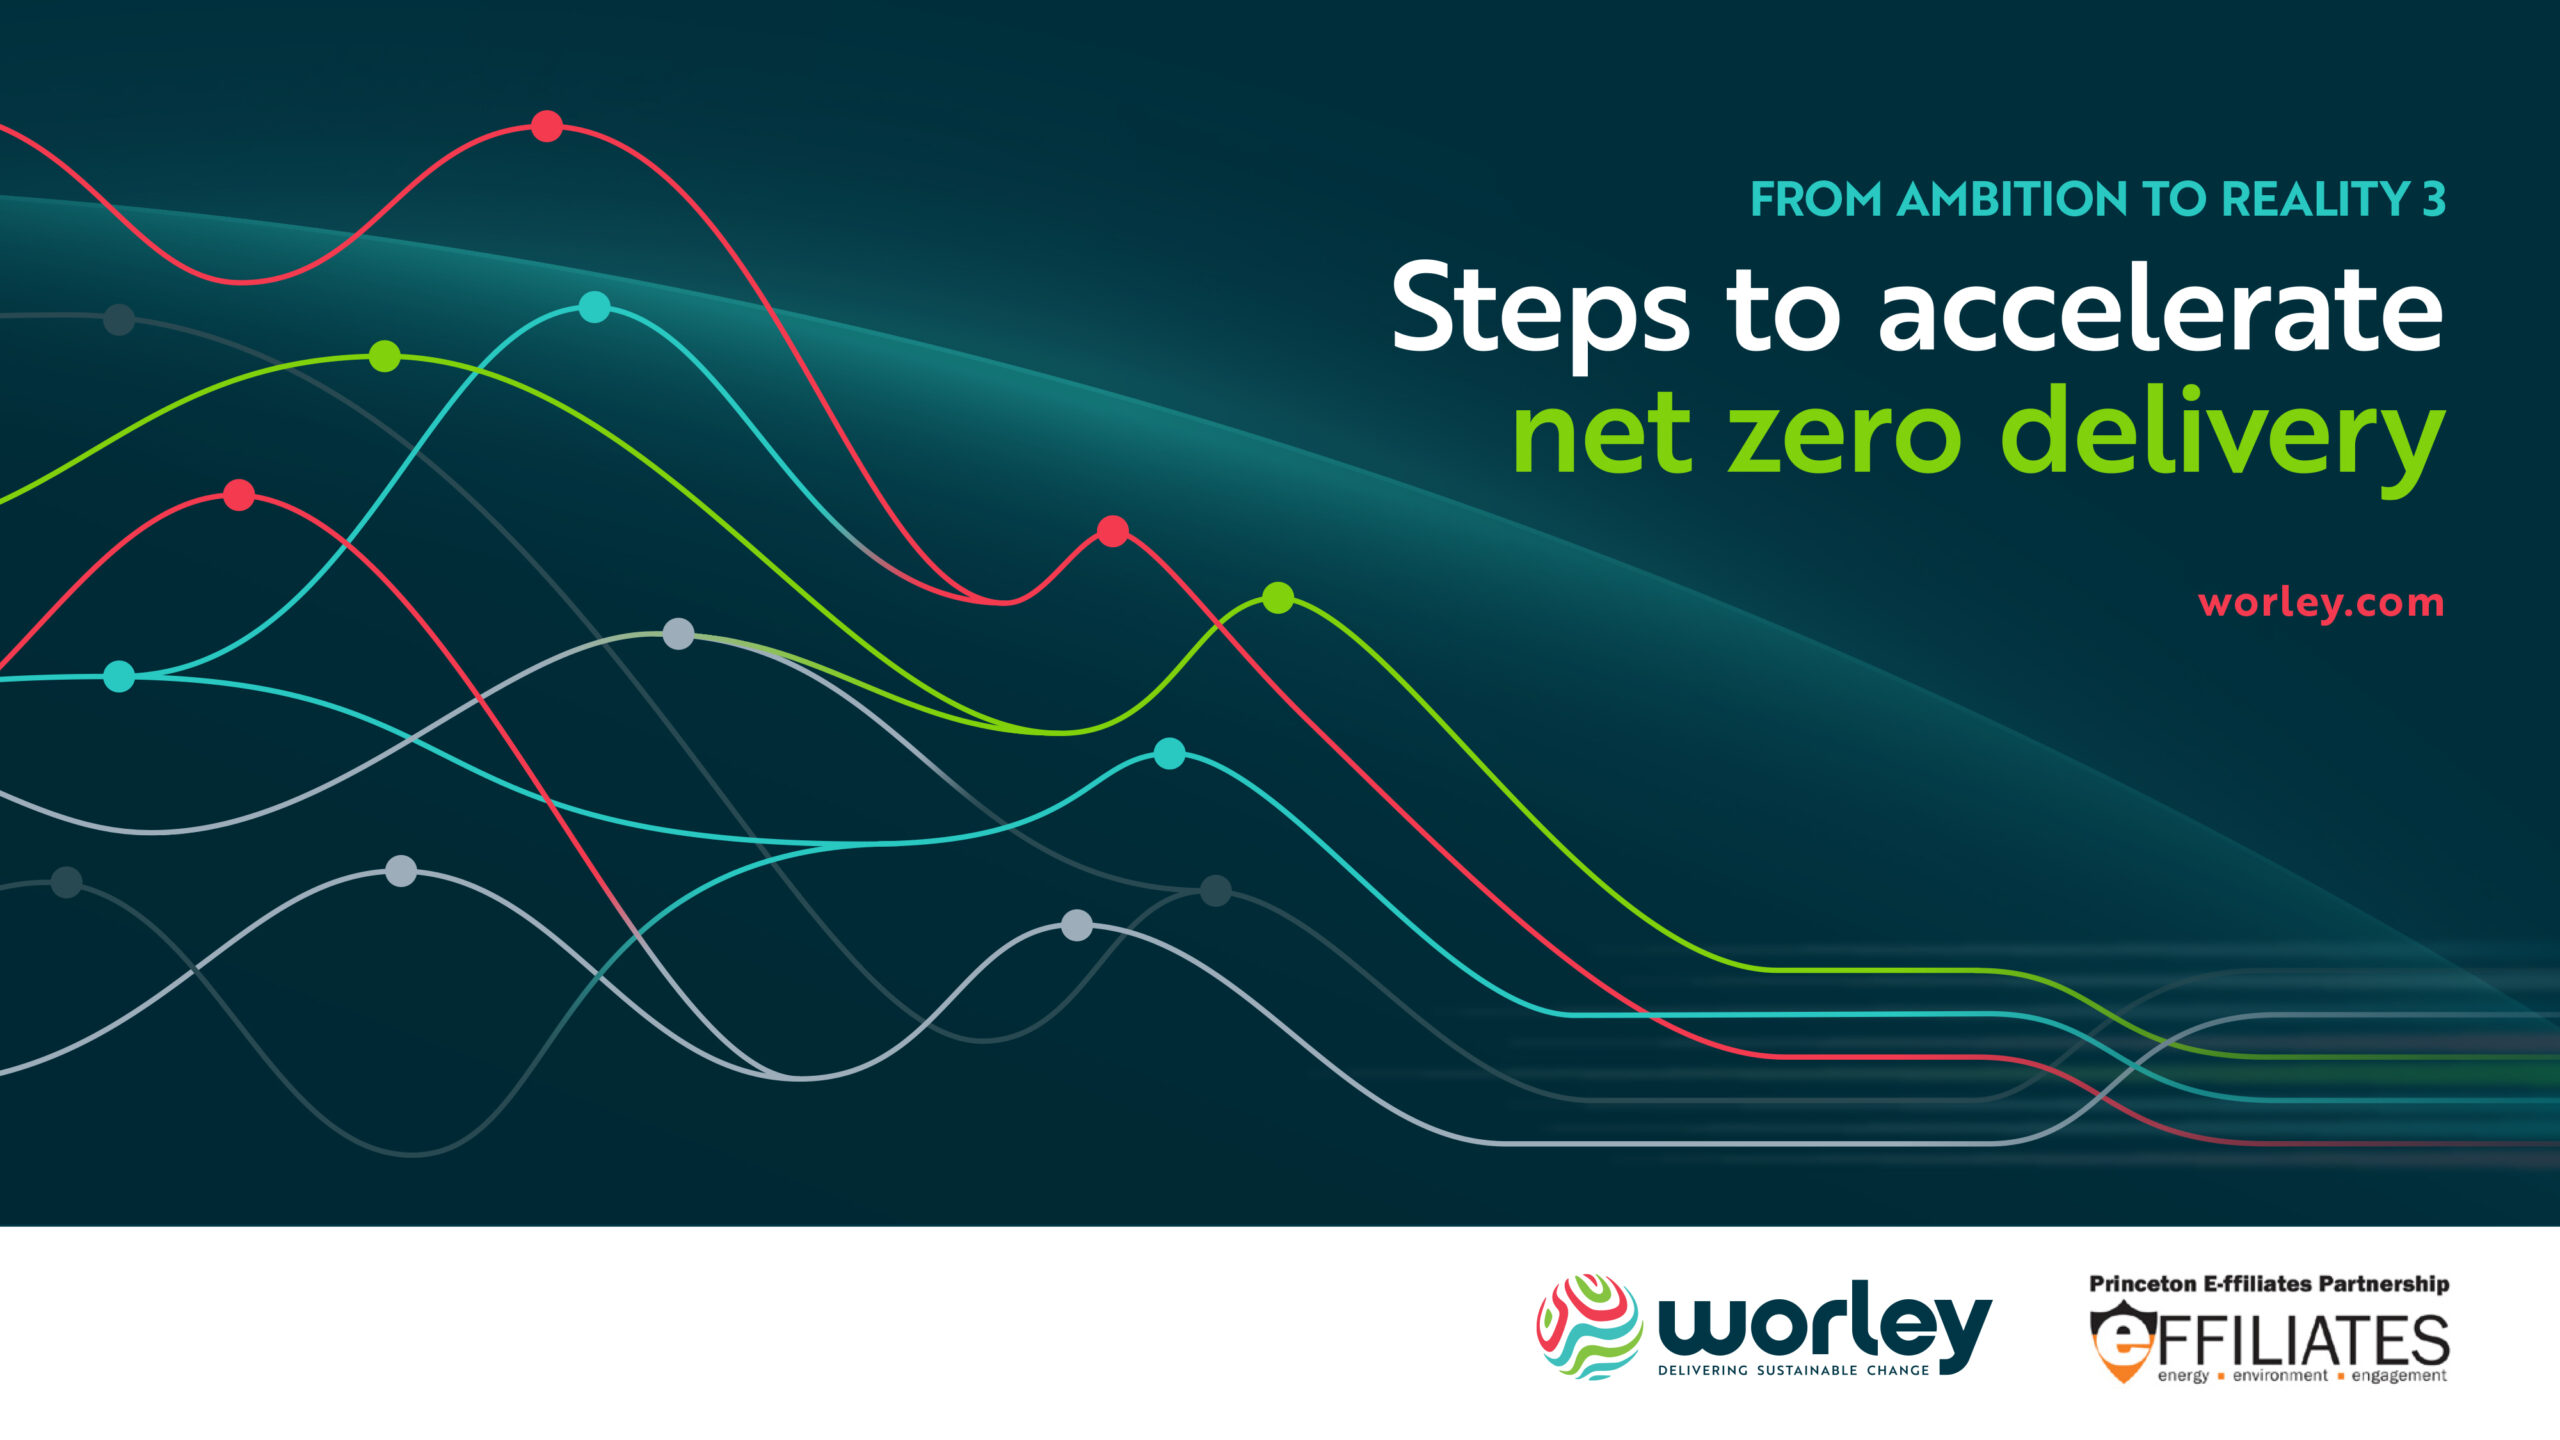 In collaboration with Worley through E-ffiliates, these papers explore the five key shifts in thinking needed to deliver a net-zero transition.